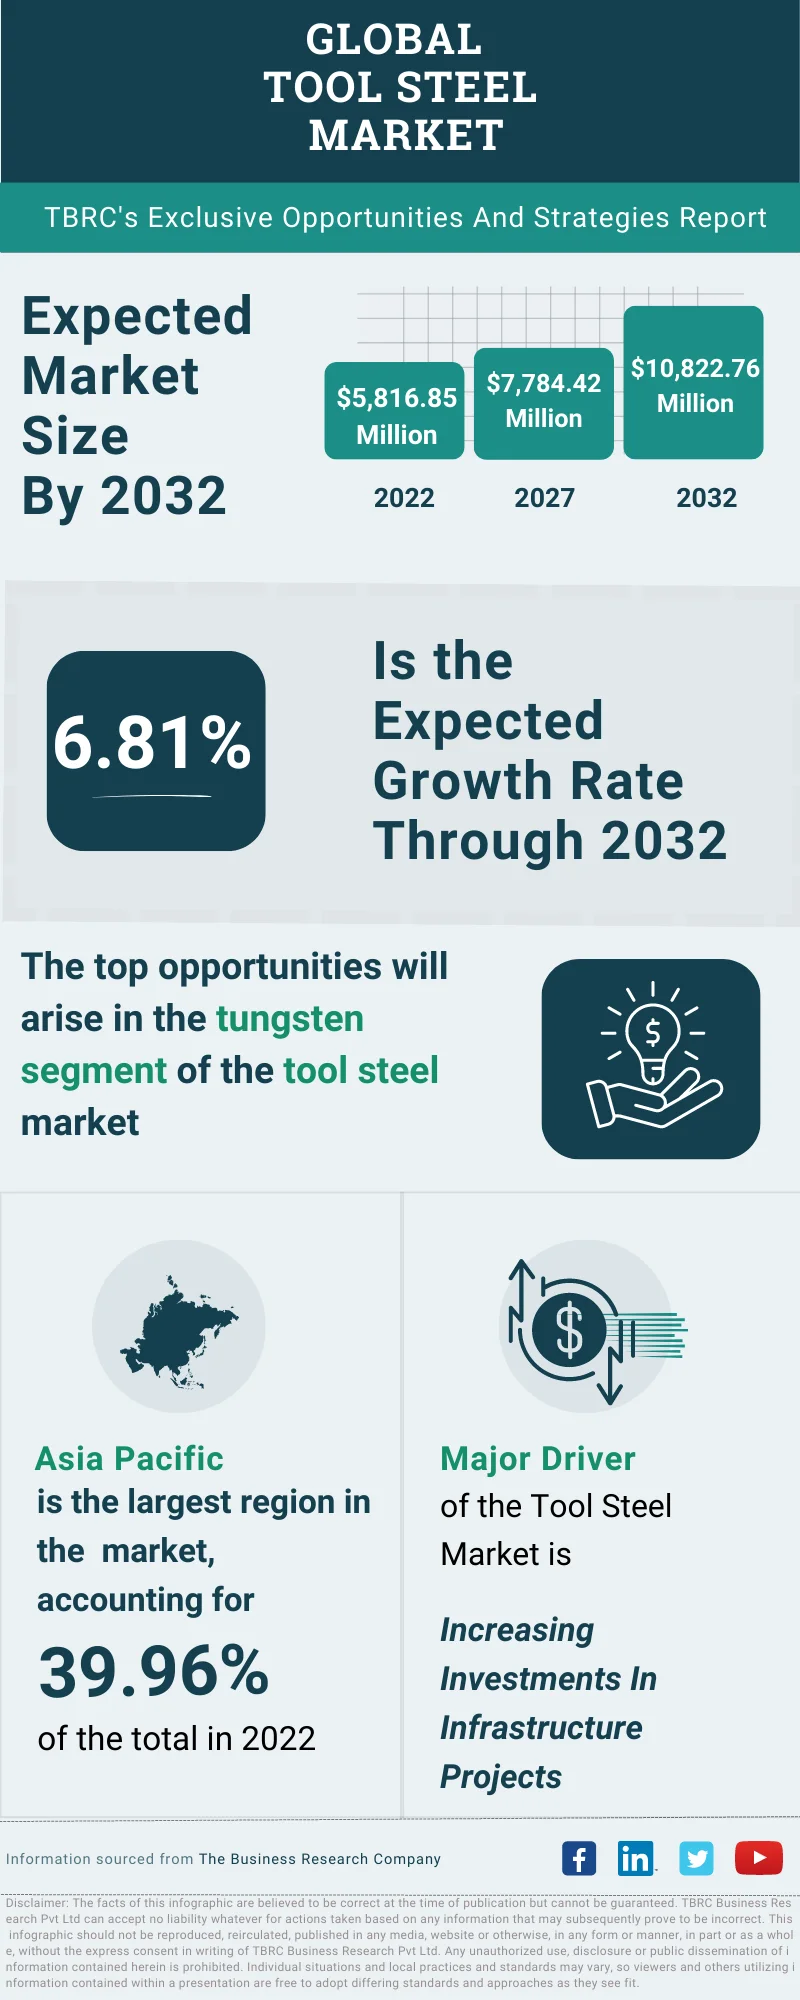 Tool Steel Global Market Opportunities And Strategies To 2032